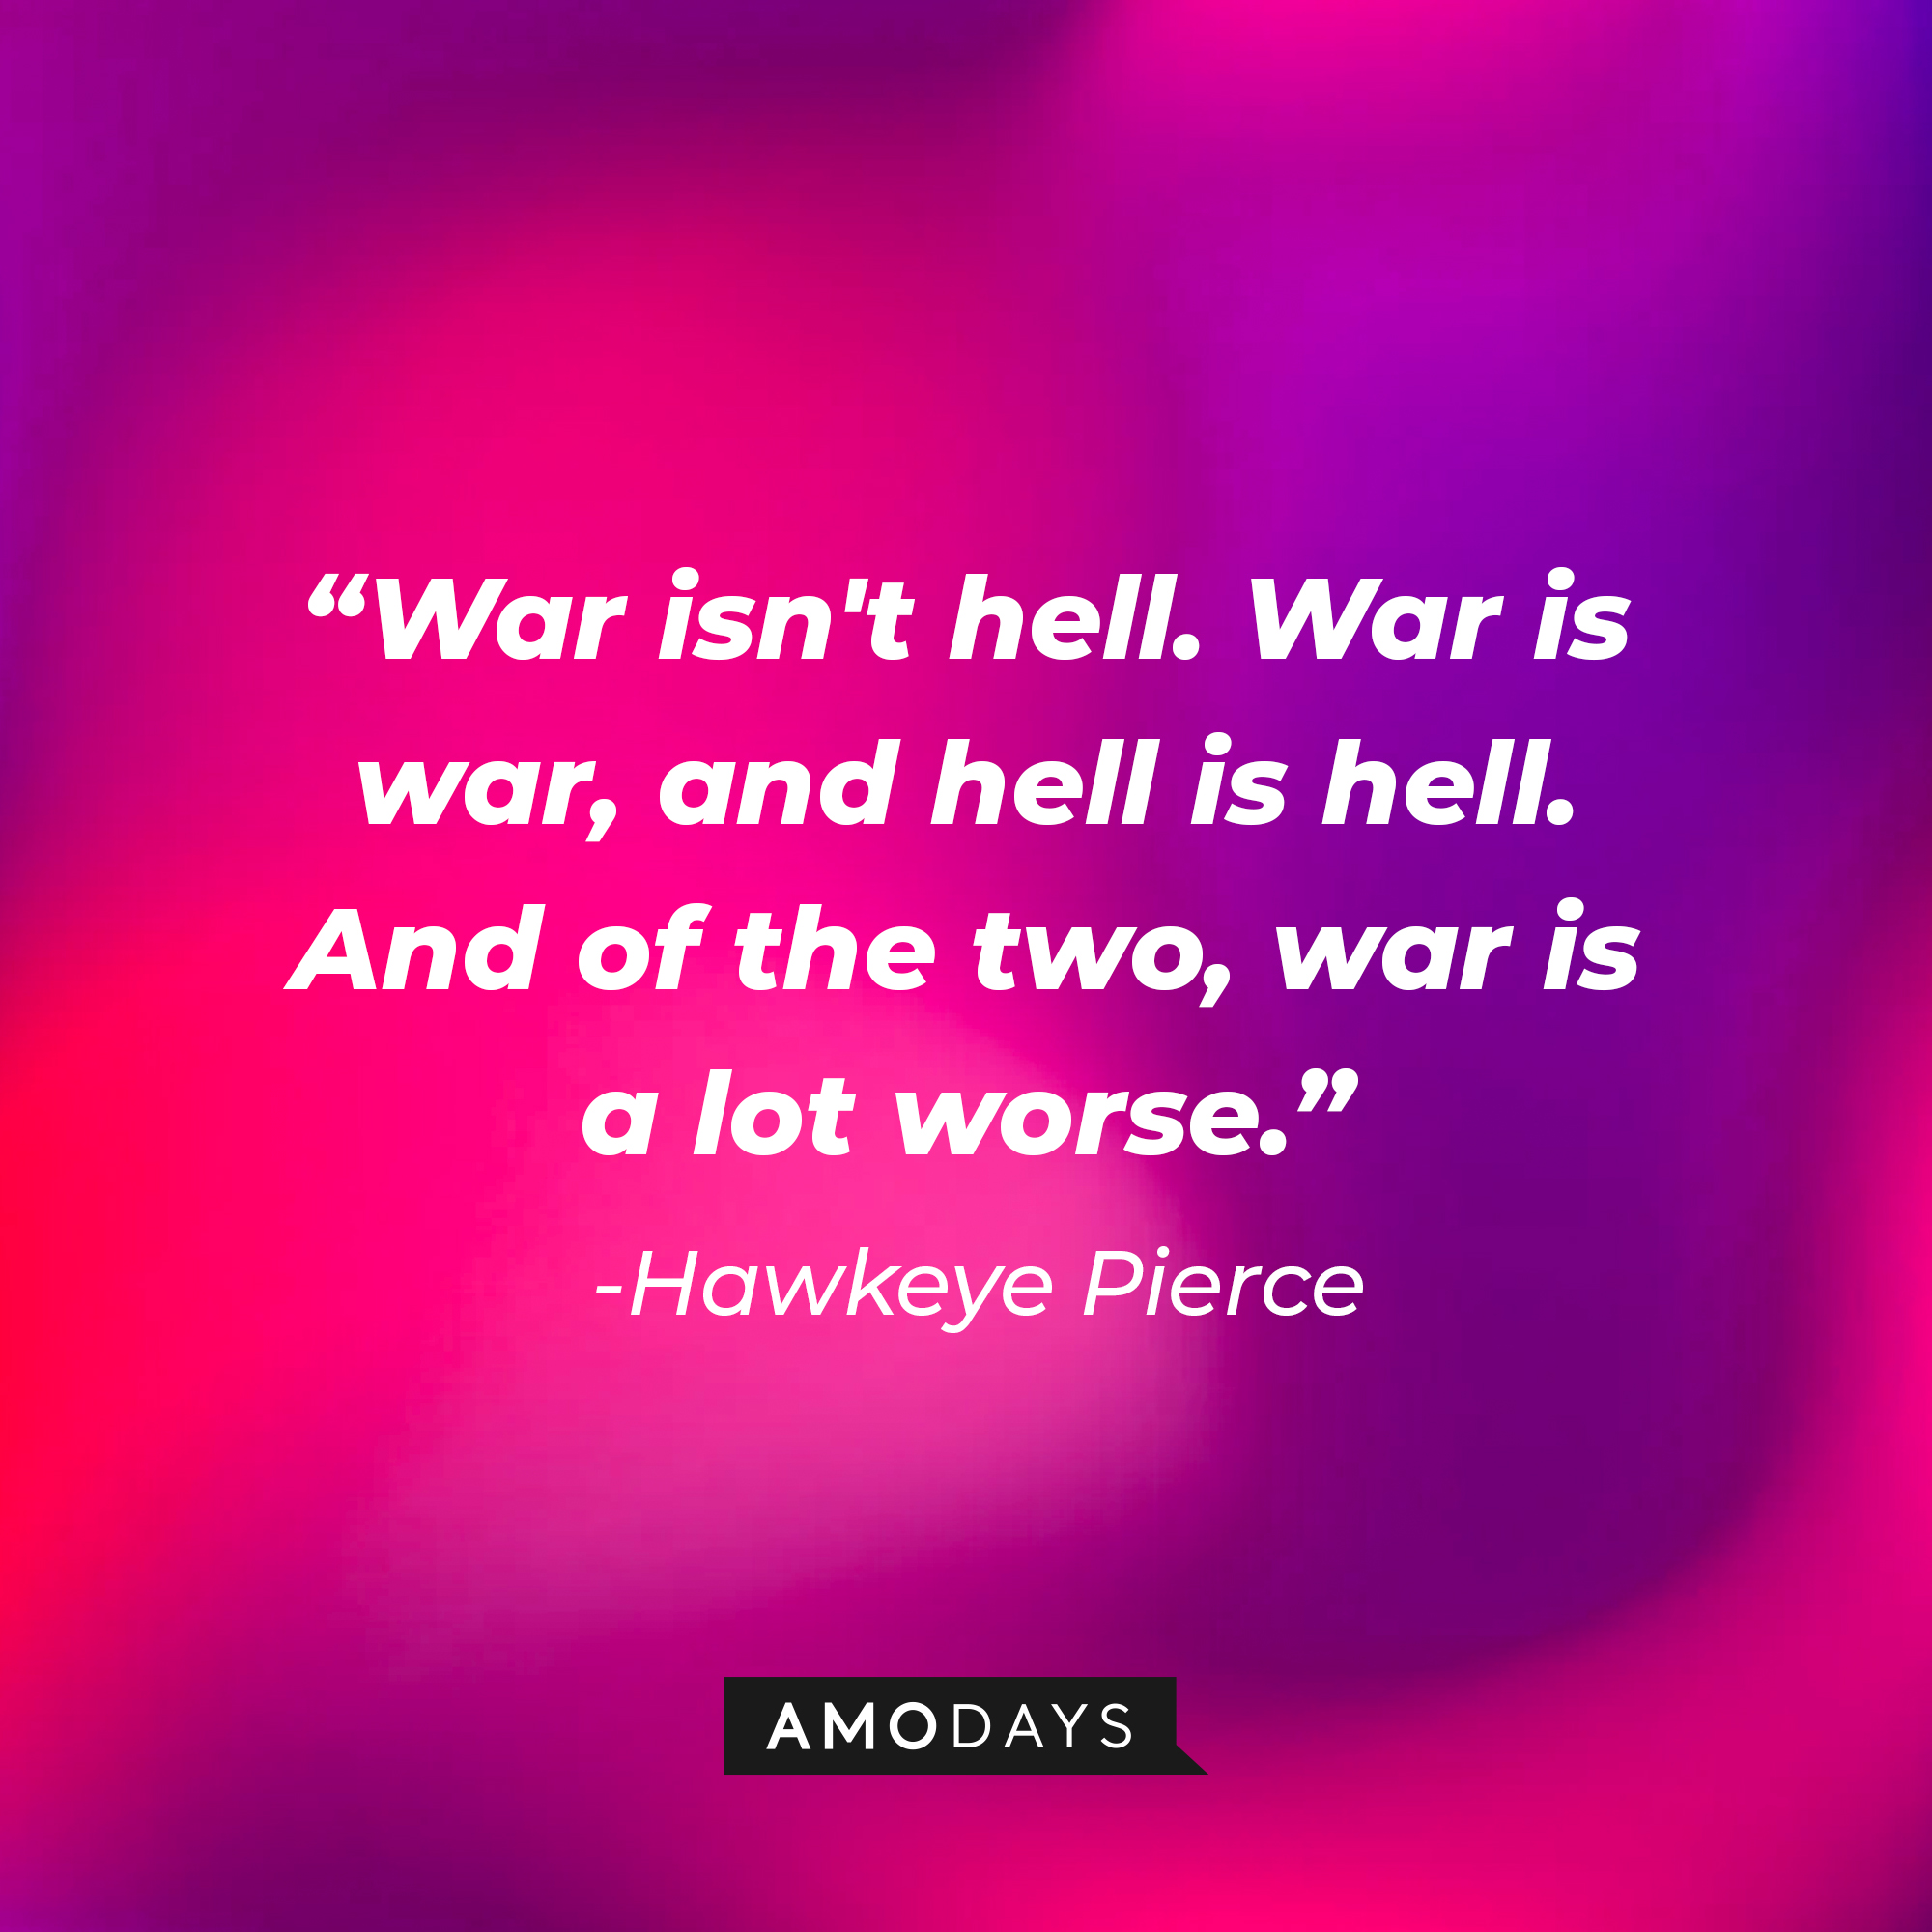 Hawkeye Pierce’s quote: “War isn't hell. War is war, and hell is hell. And of the two, war is a lot worse.” | Source: AmoDays